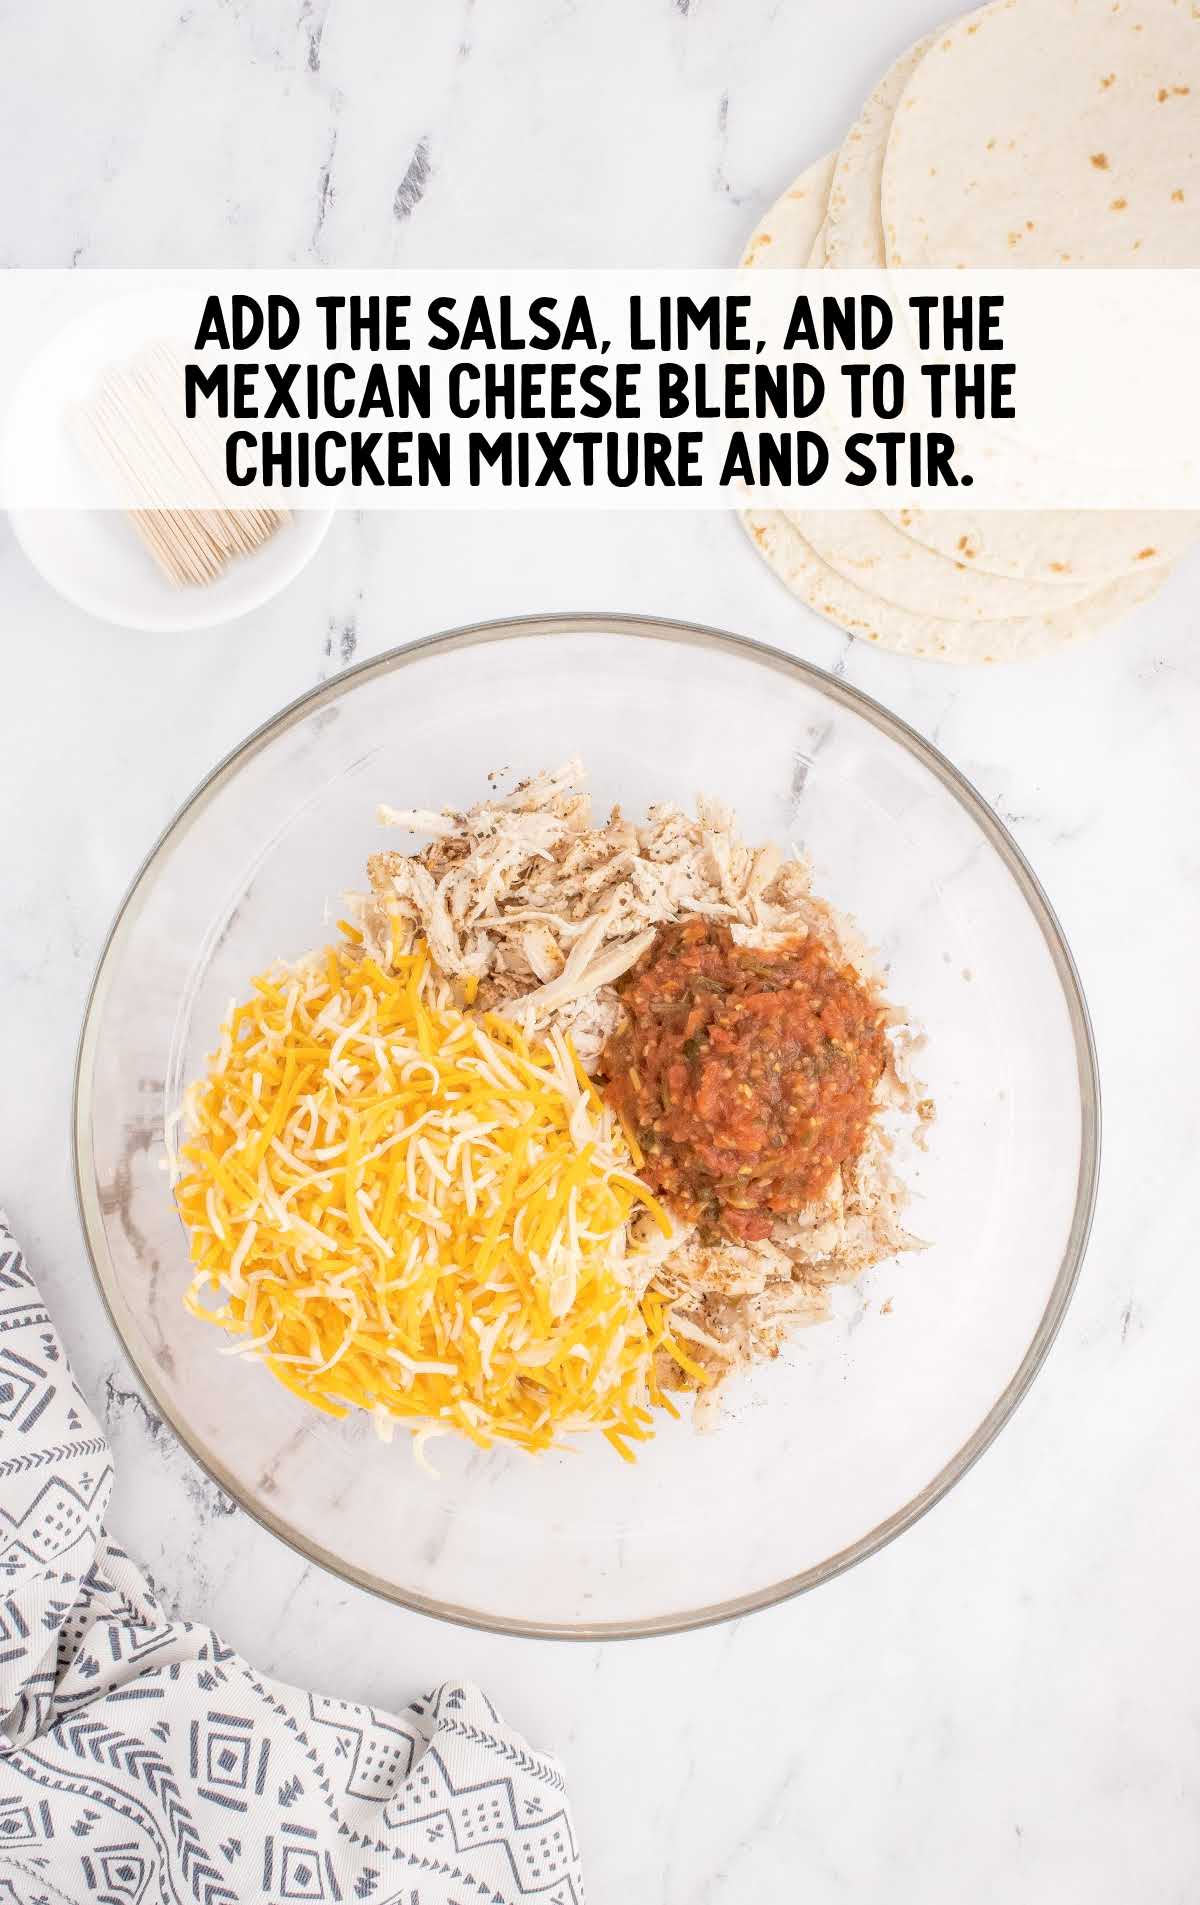 salsa, lime juice, and the Mexican cheese blended into the chicken mixture in a bowl